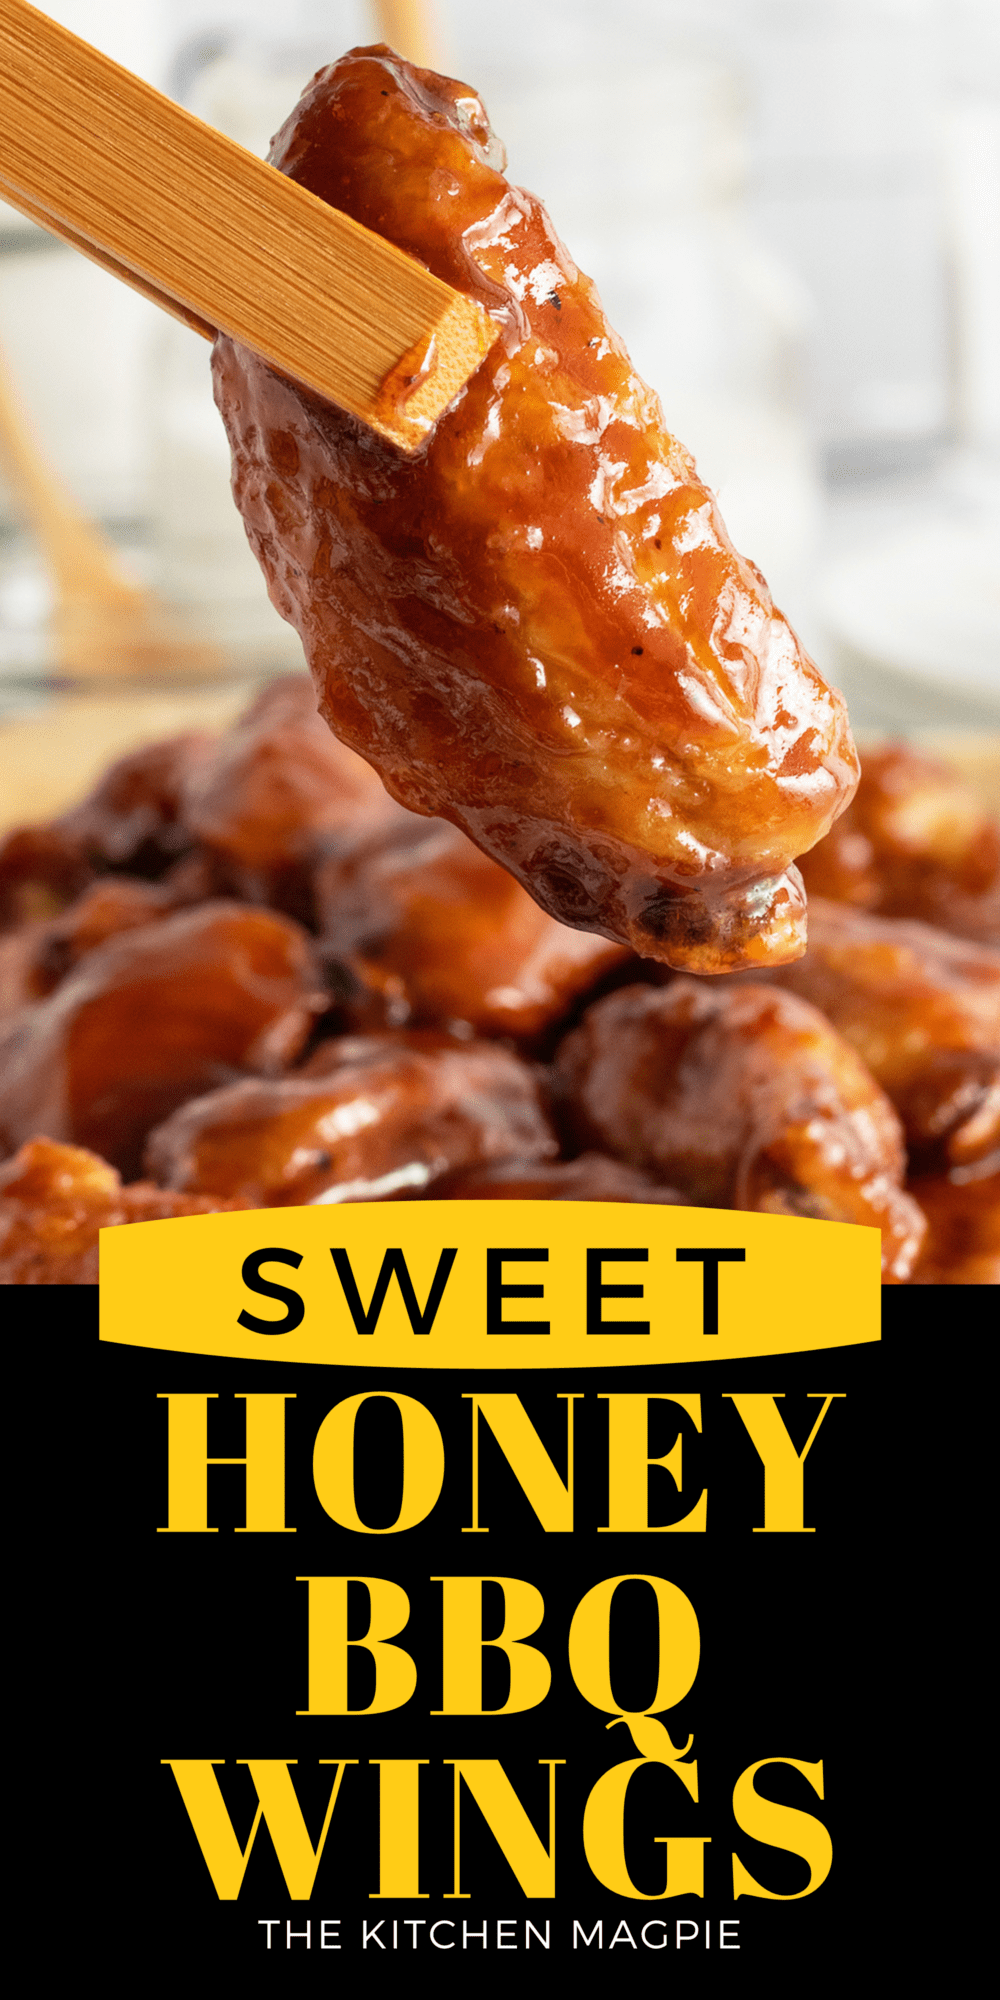 Honey BBQ Wings are everything a wing should be, crispy and juicy with a sweet and sticky sauce. Always a family favorite.